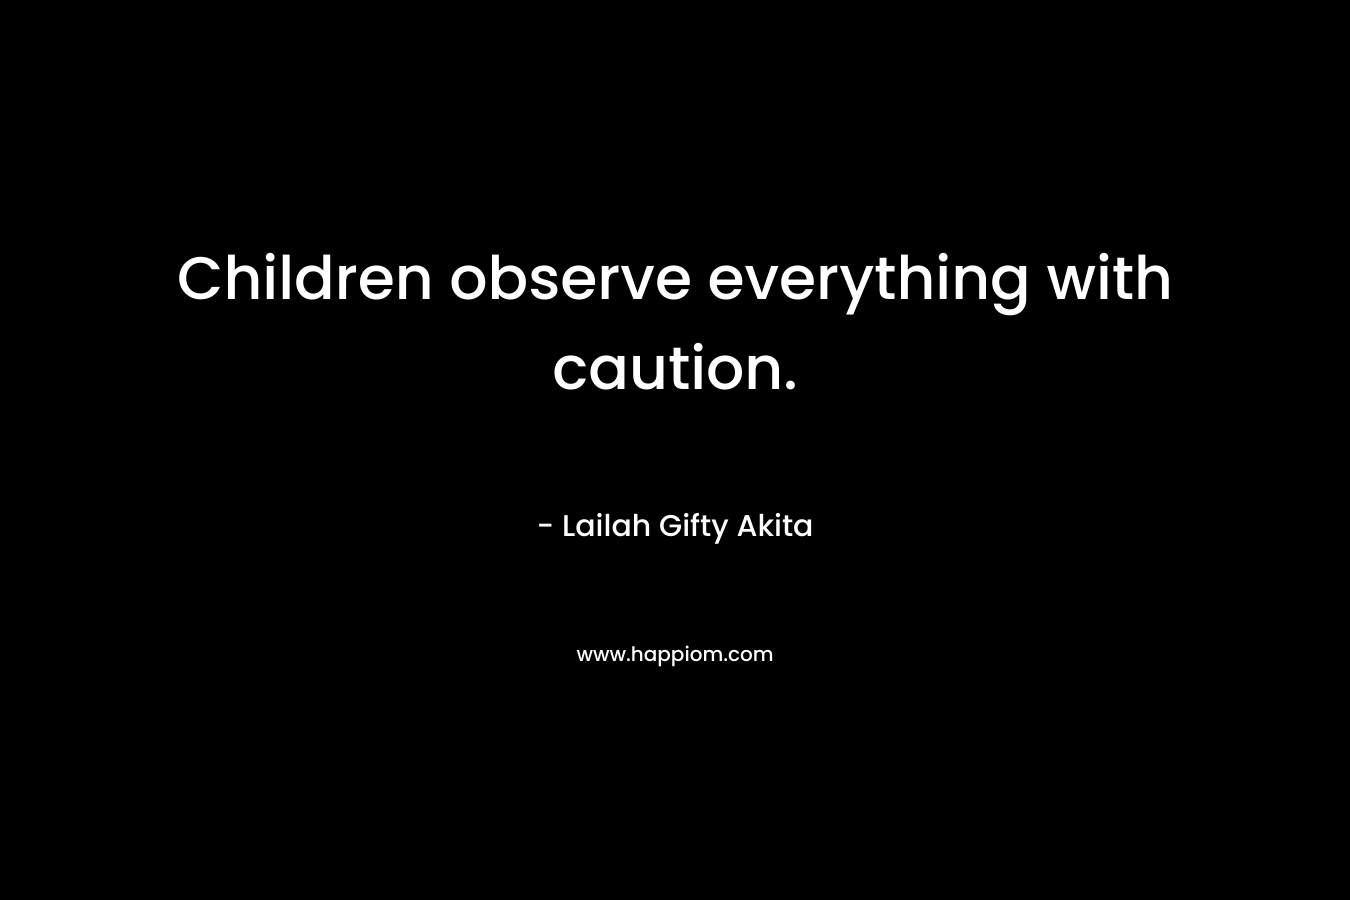 Children observe everything with caution. – Lailah Gifty Akita